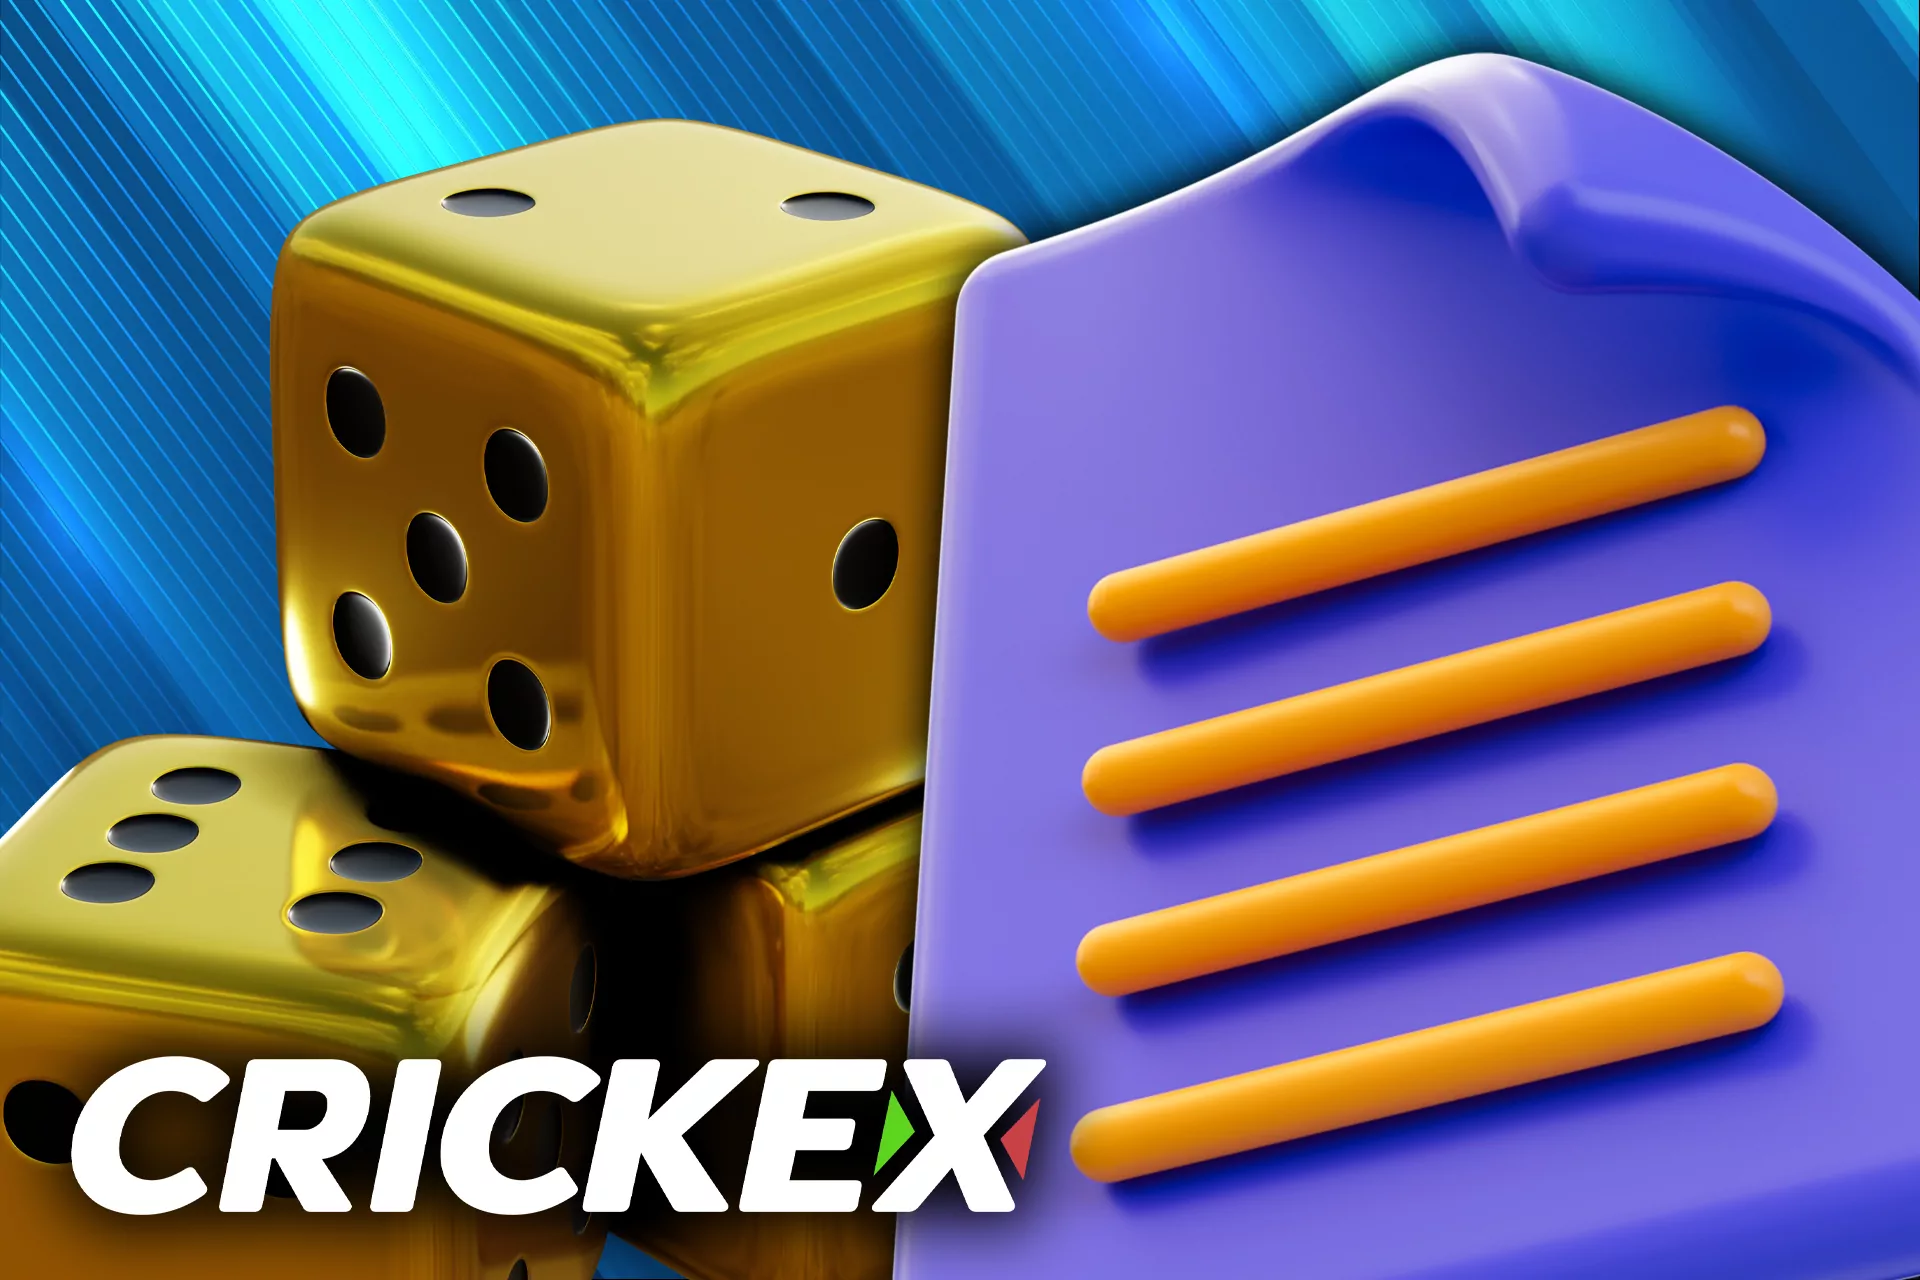 The amount of markets, odds, and bets are regulated by Crickex.